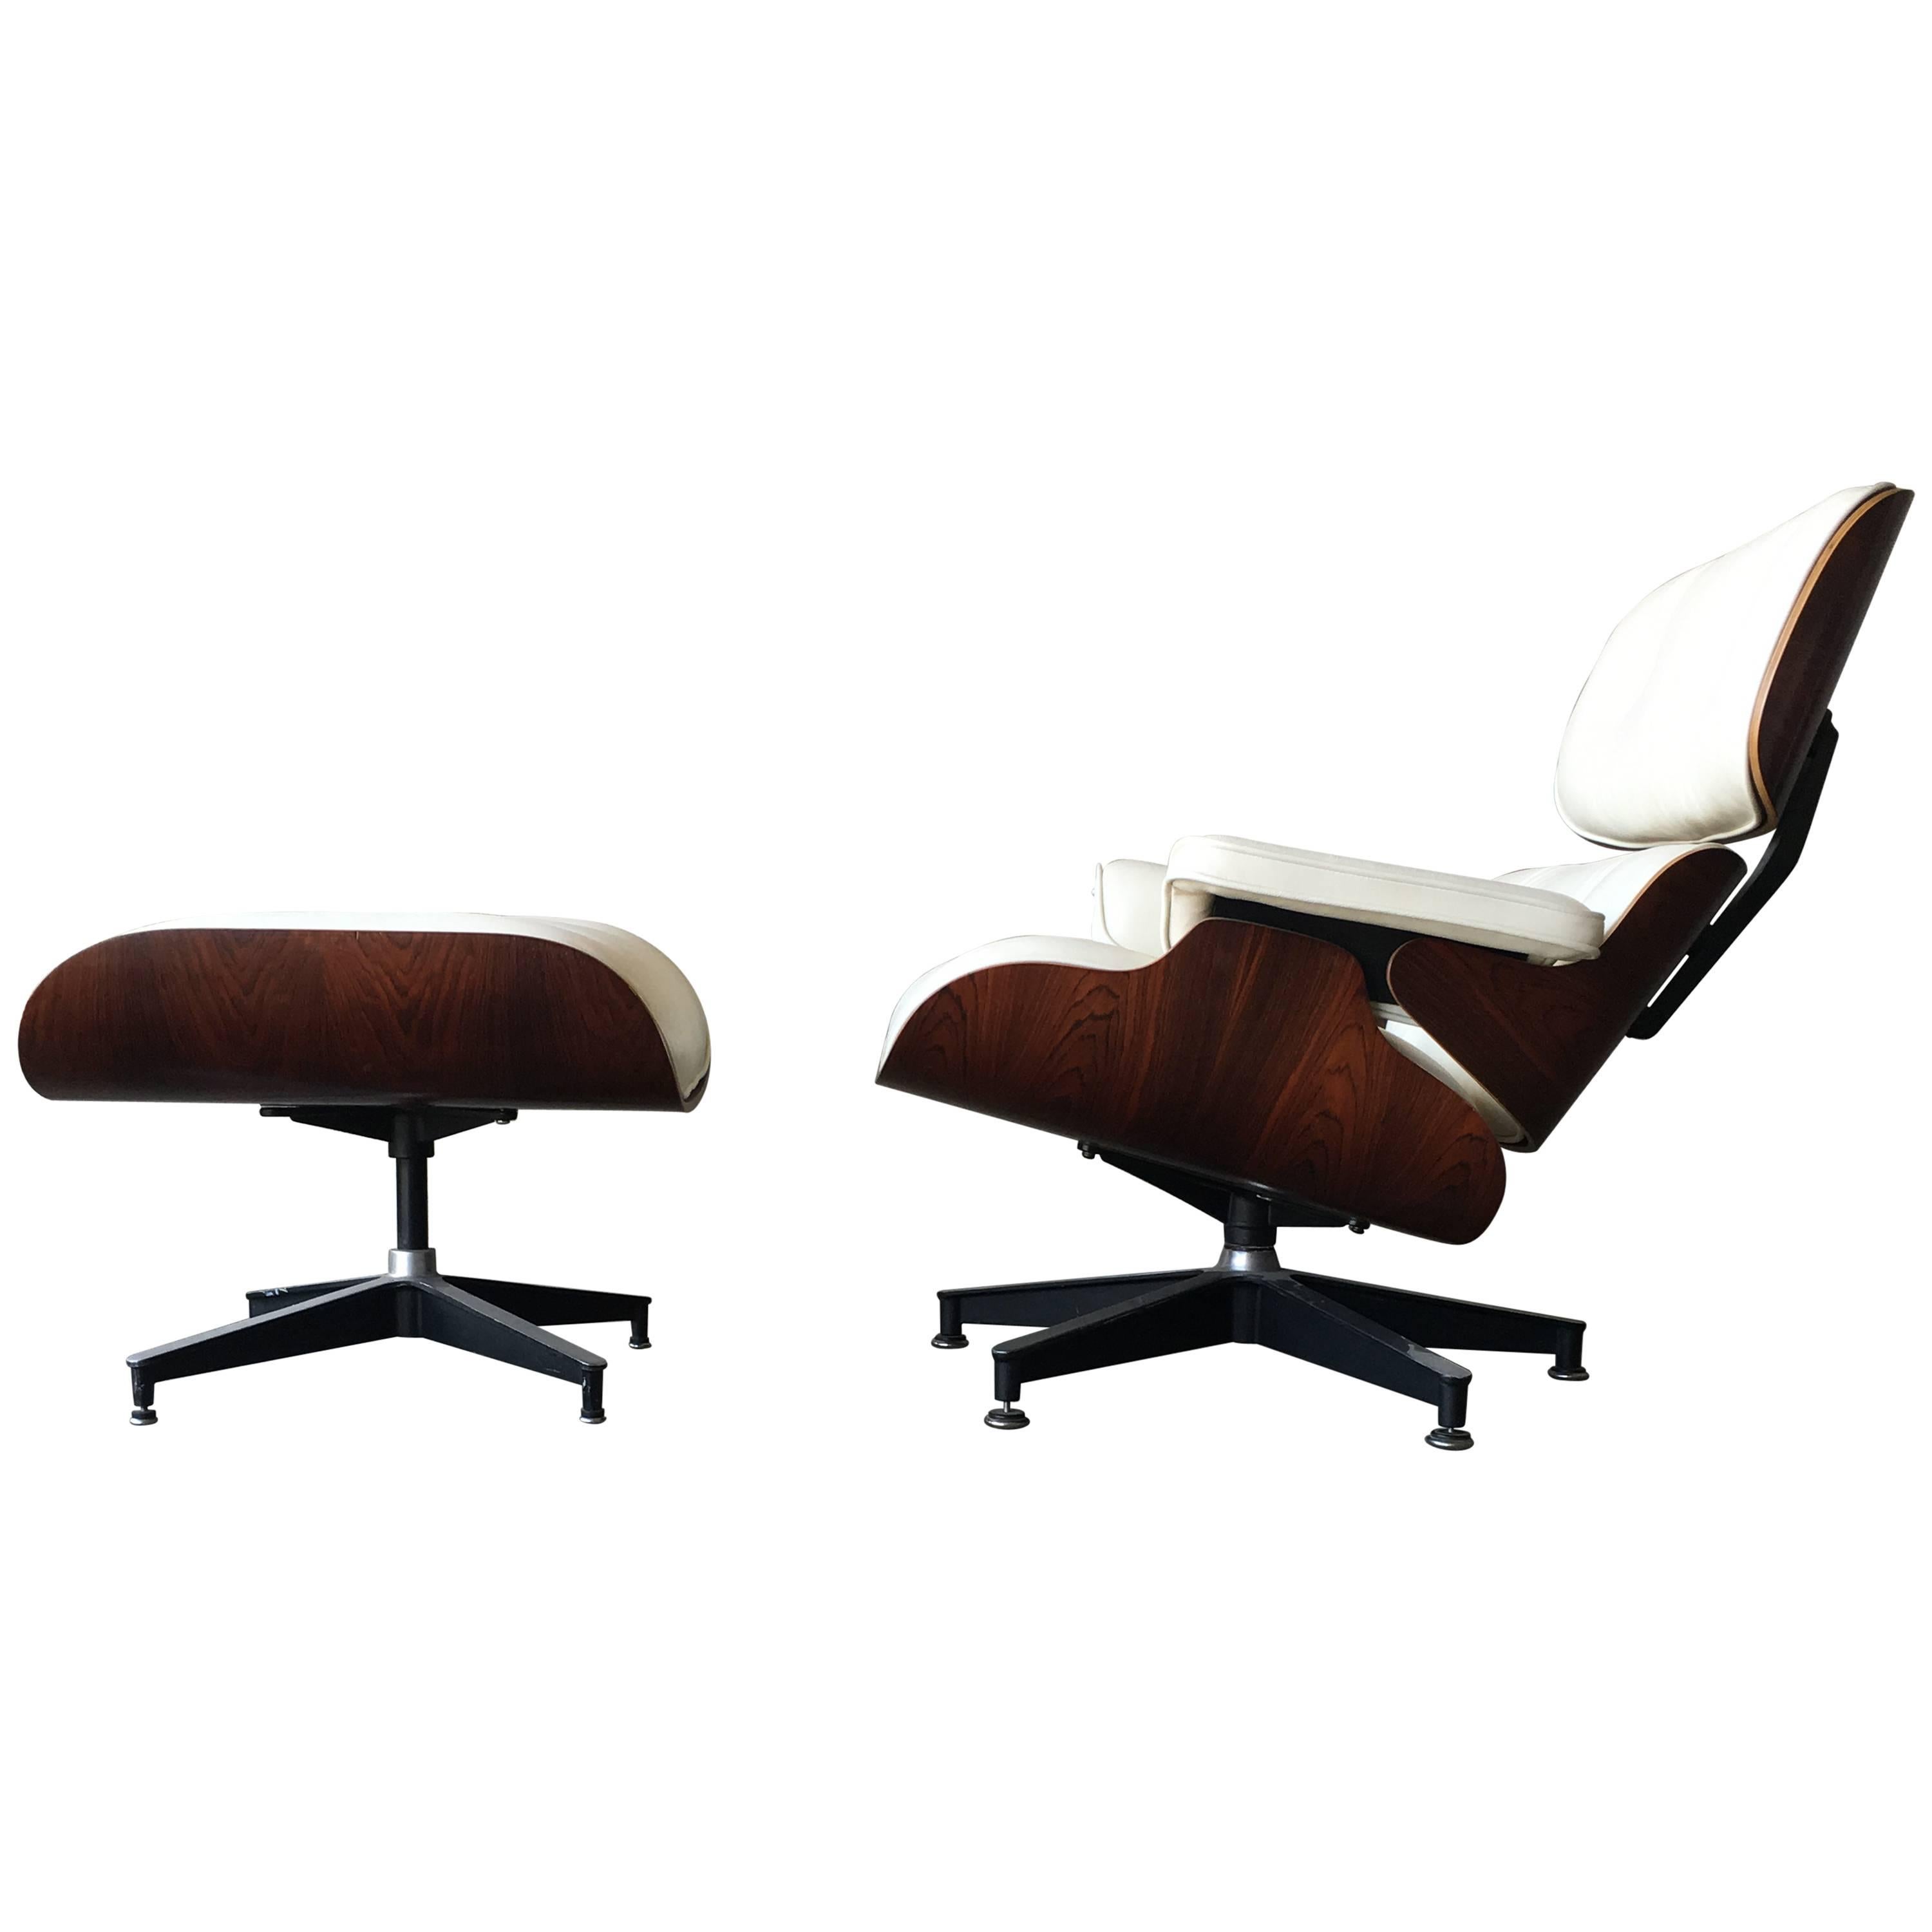 Herman Miller Eames Lounge Chair and Ottoman with New Perfect Ivory Leather